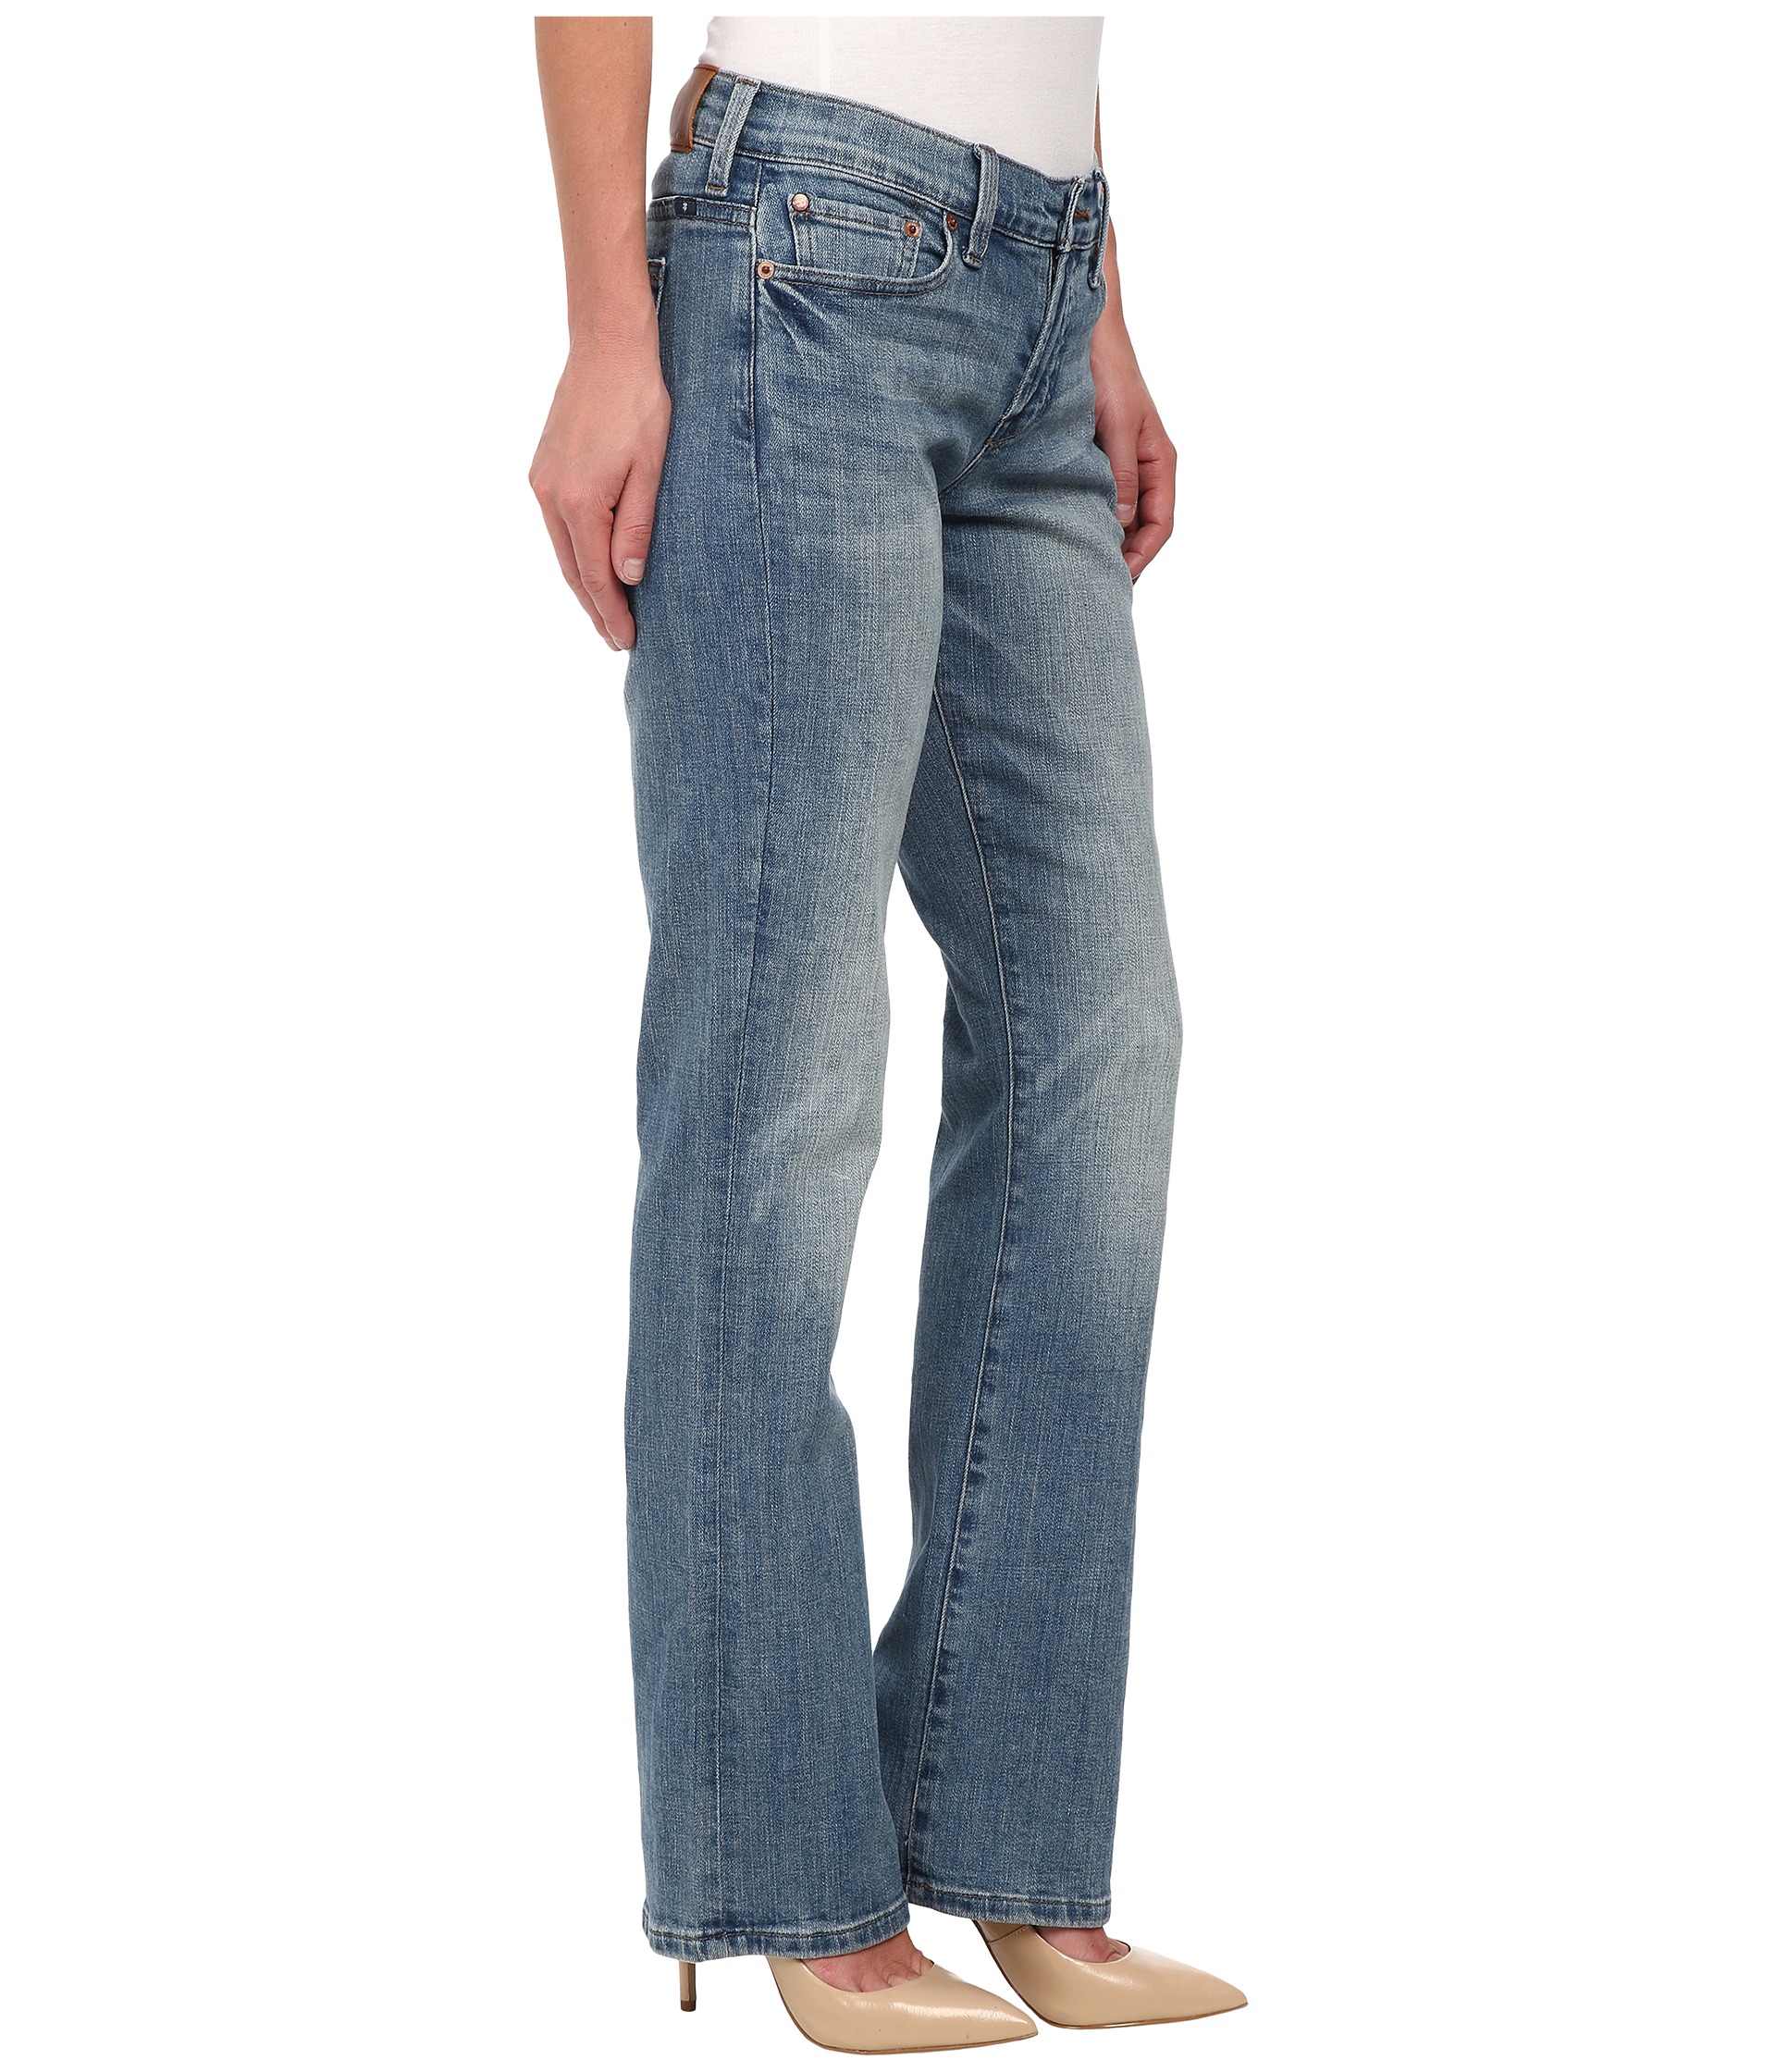 20 Luxury Lucky Brand Jeans Size Chart